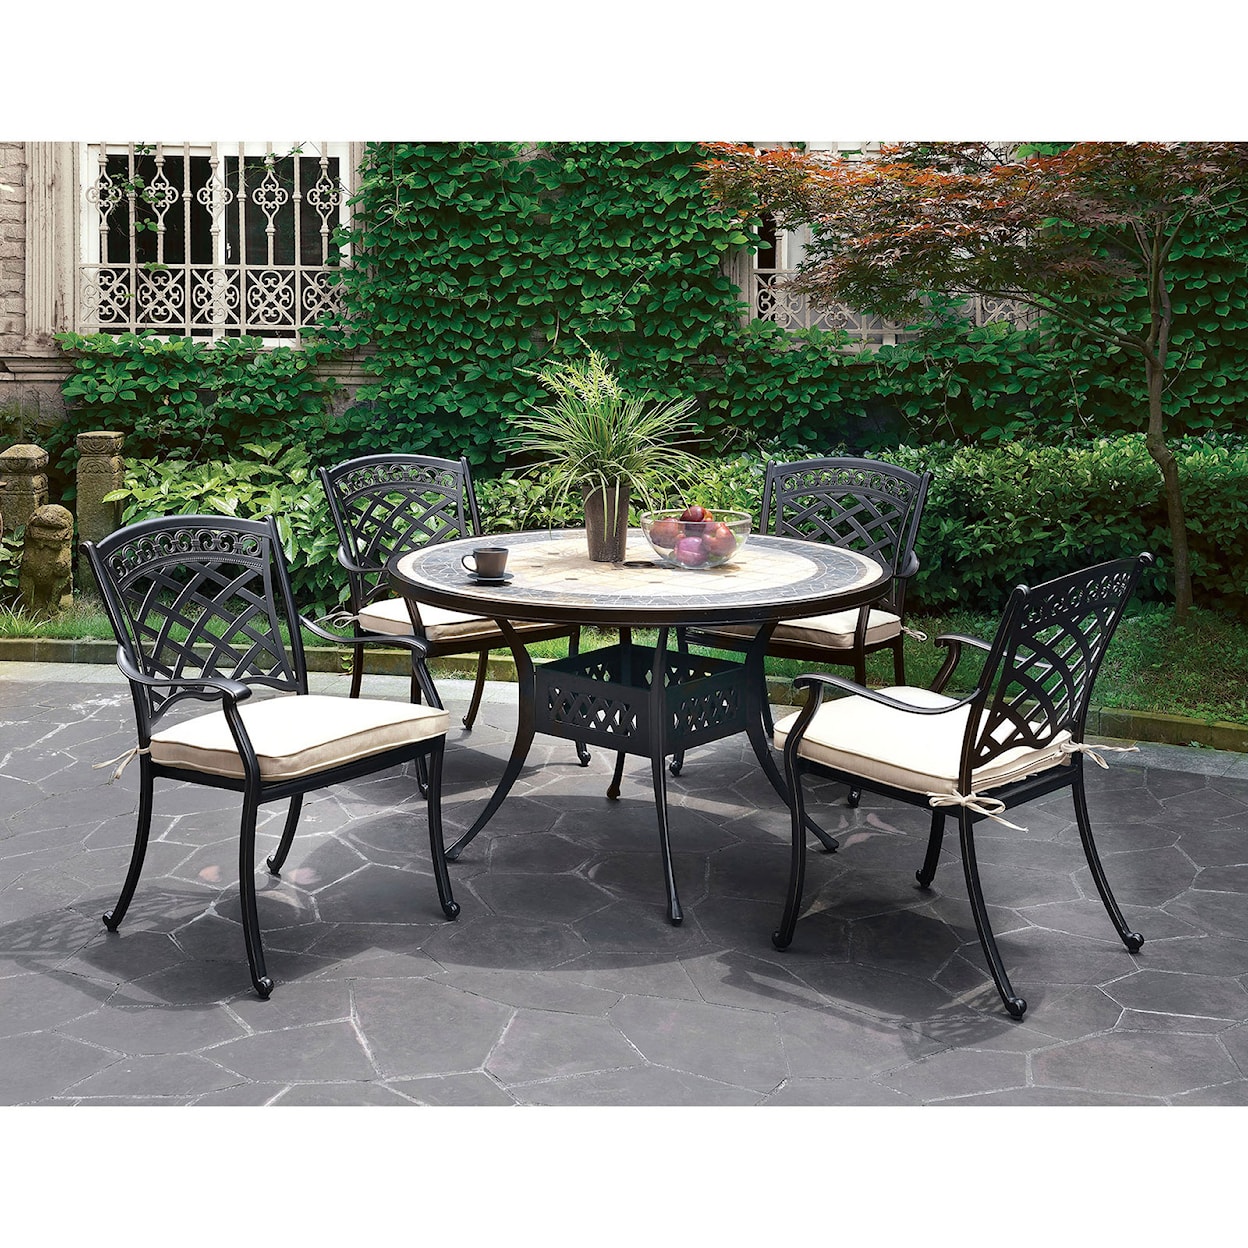 FUSA Charissa Round Table + 4 Arm Chairs